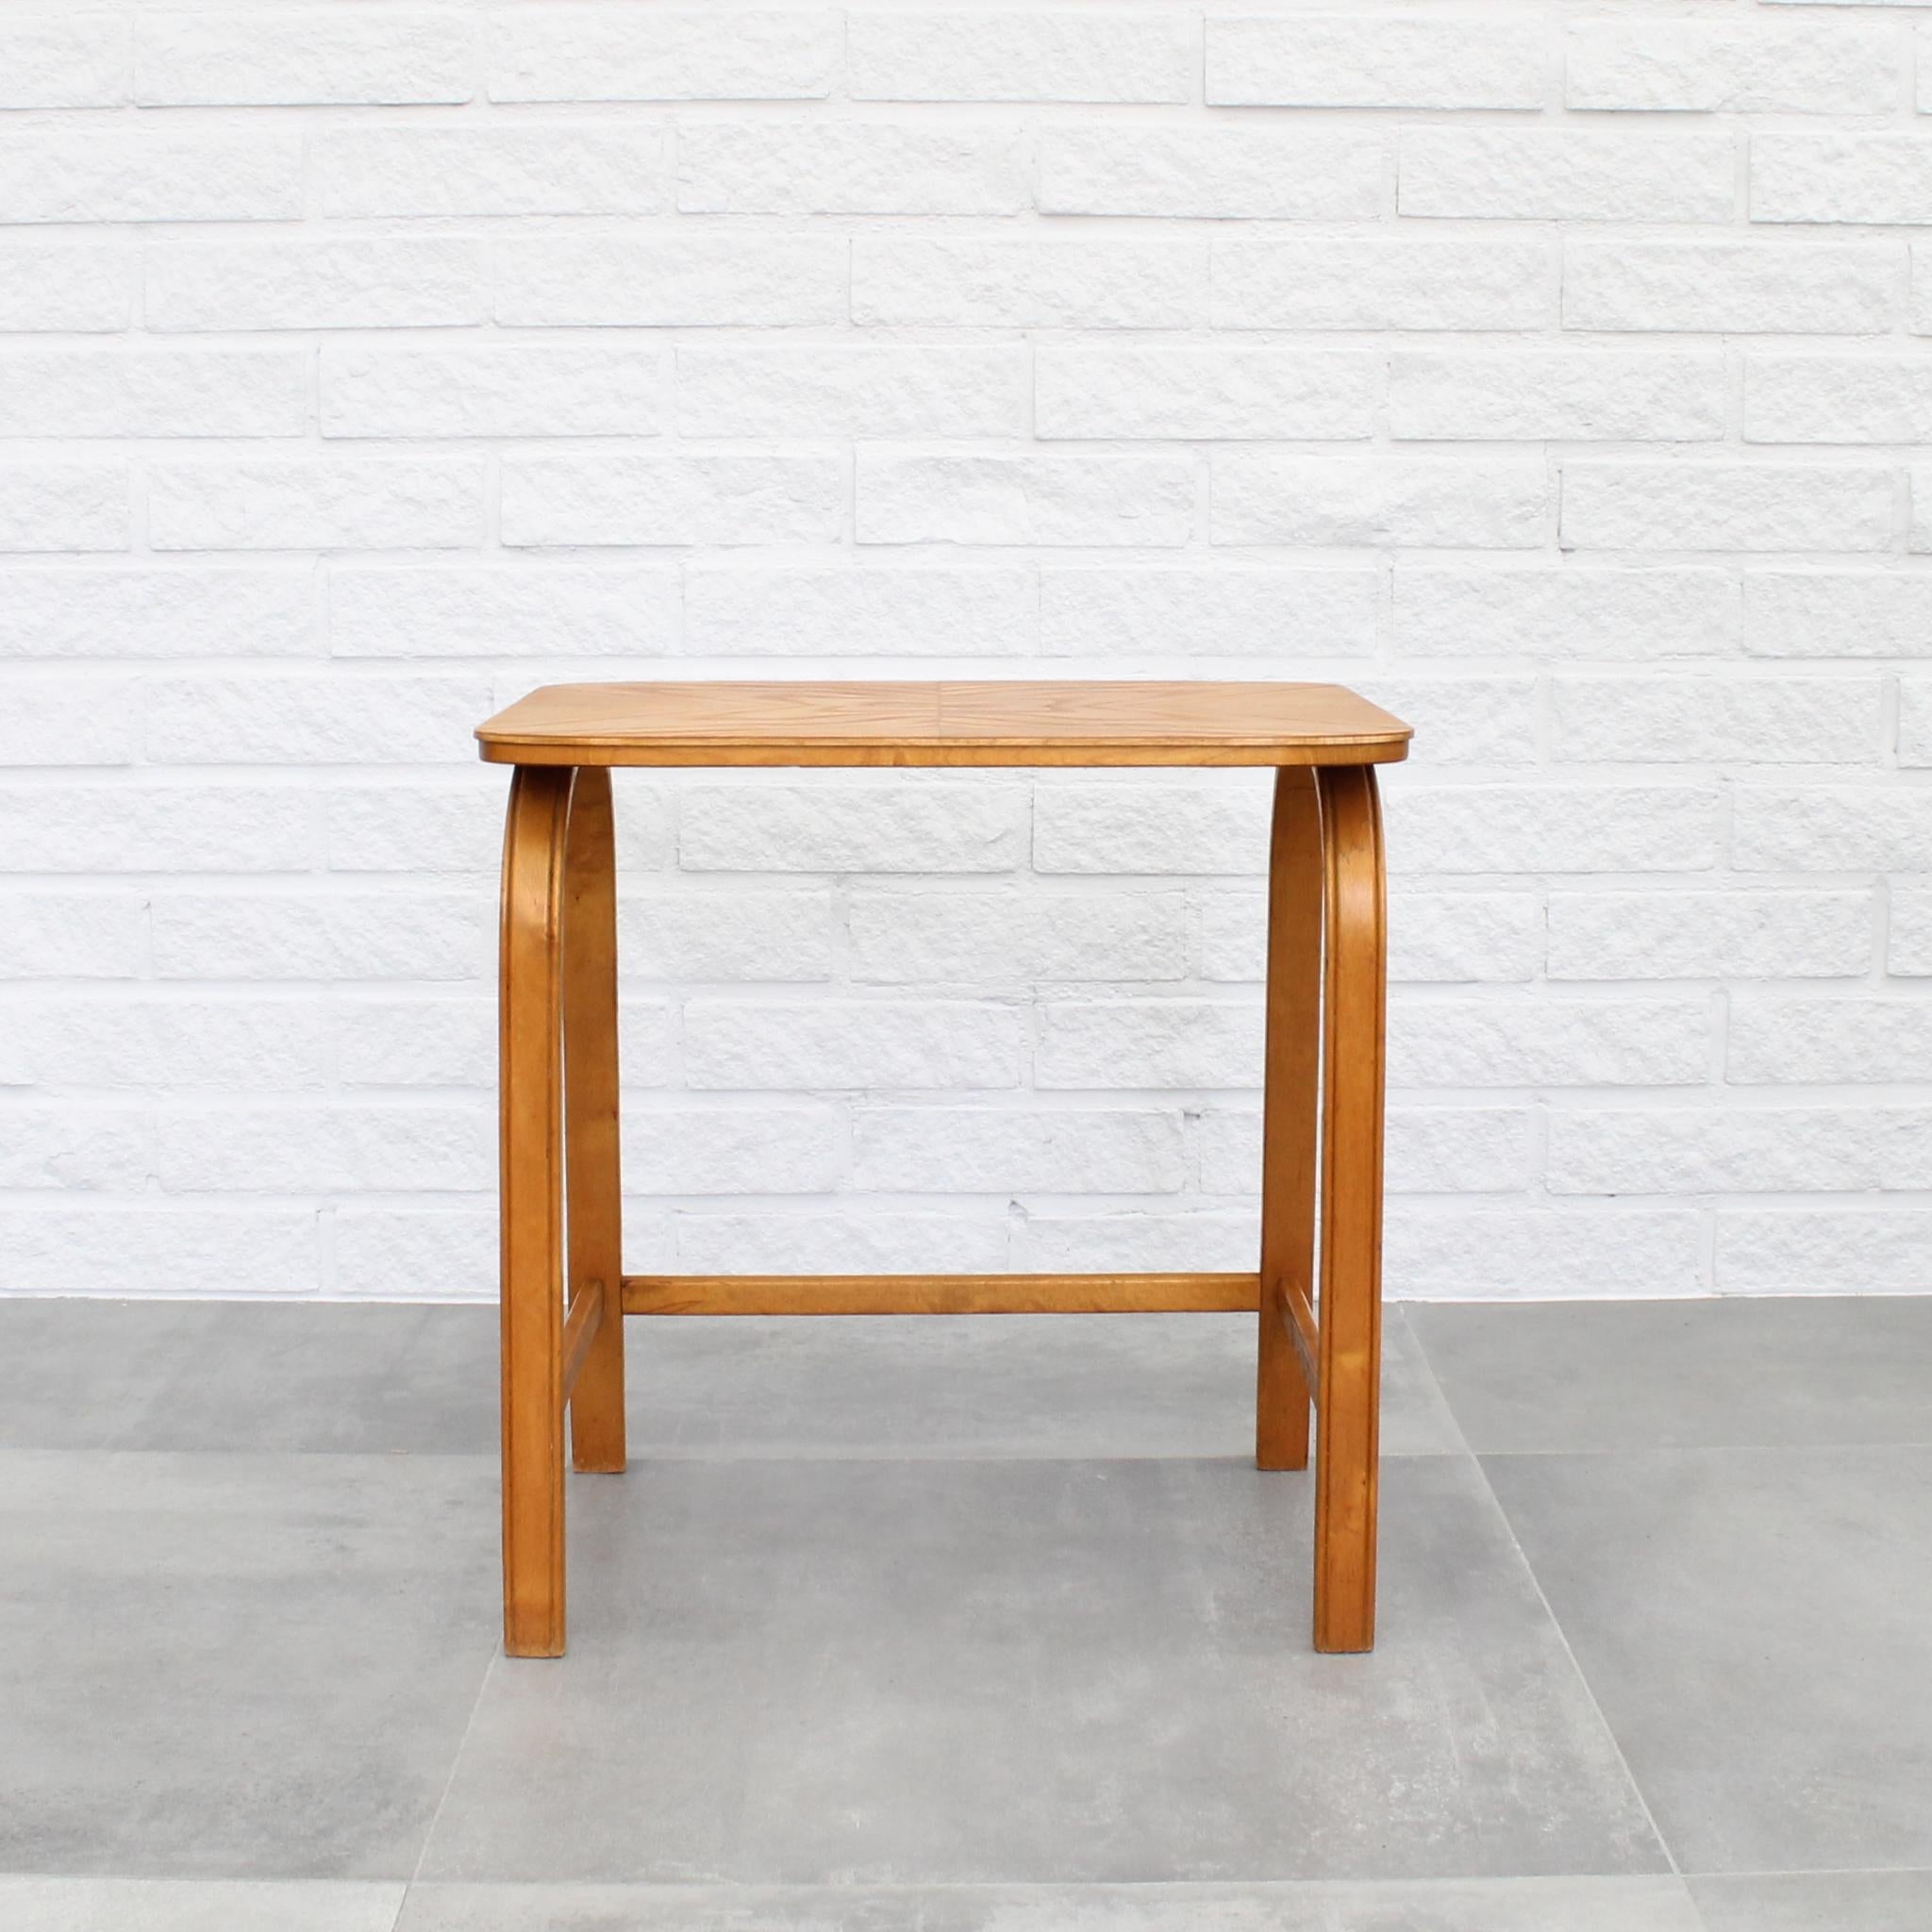 Side table 741 designed by the Swedish architect Axel Larsson for the manufacturer Svenska Möbelfabrikerna in Bodafors. Features elm veneer with bentwood legs in birch. Produced in the 1940’s. Swedish designer Axel Larsson joined Svenska